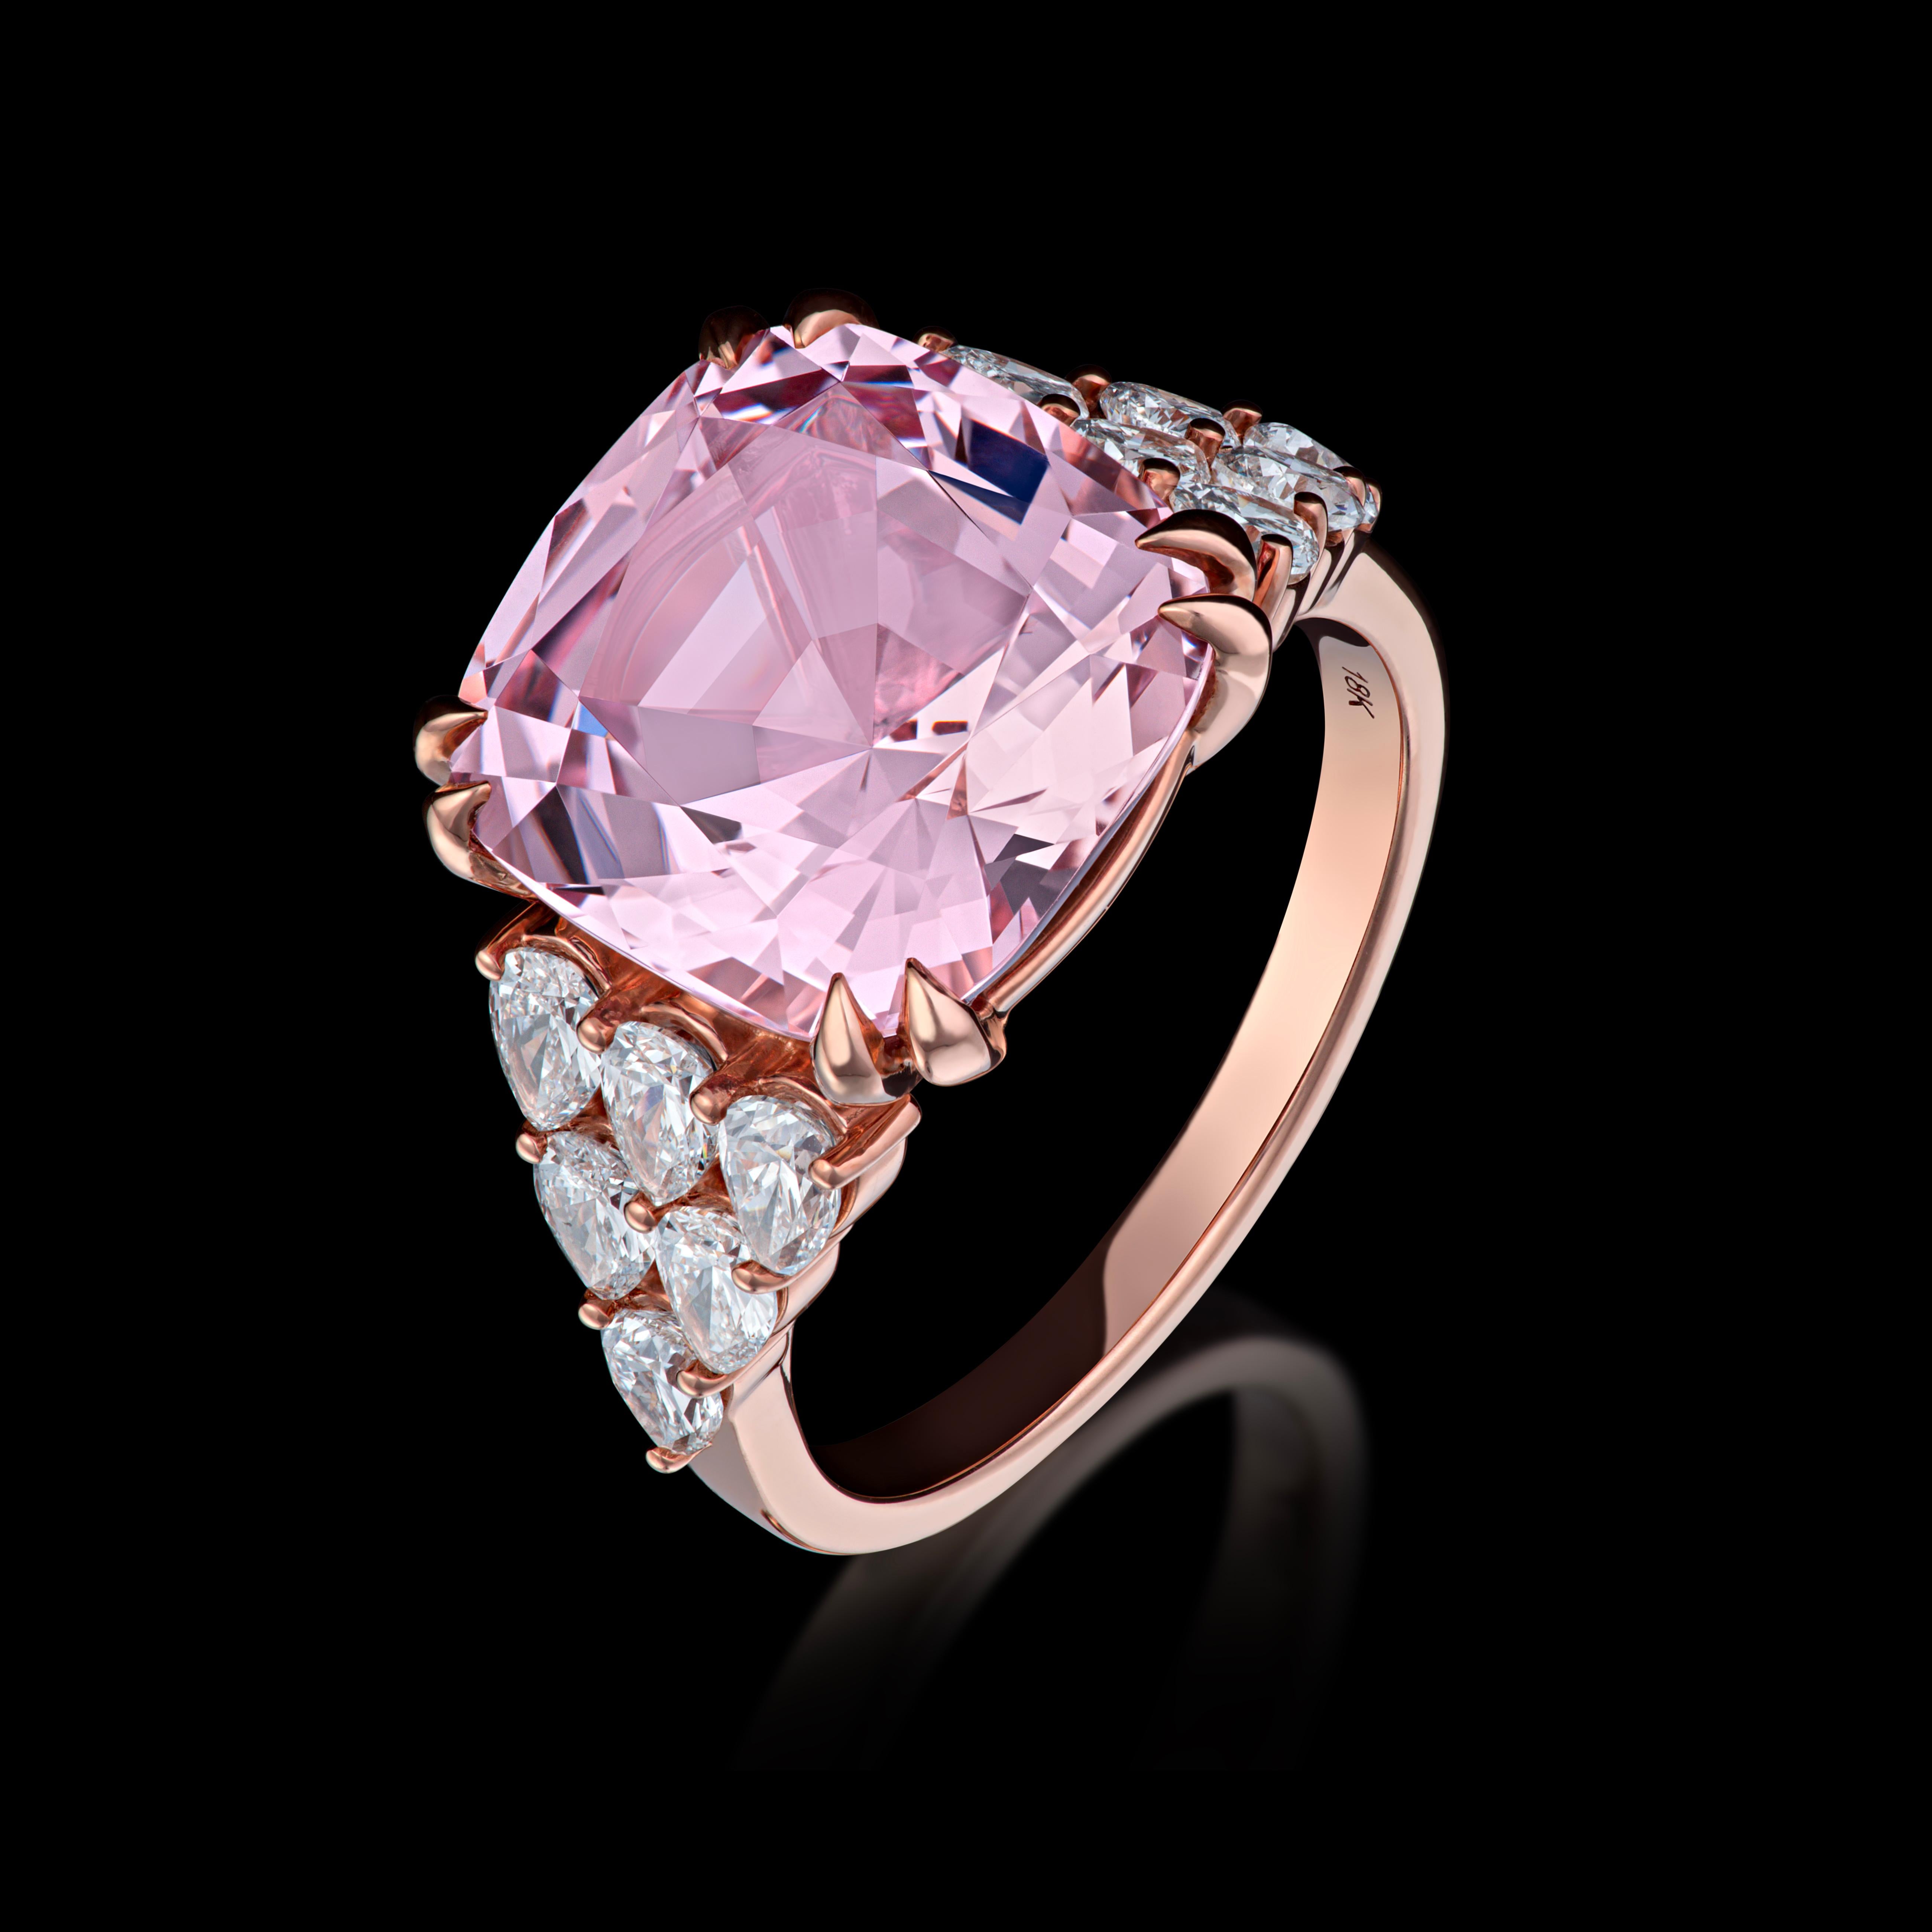 7.09 carat morganite (pink) and diamond cocktail ring. Flawless central cushion cut morganite flanked by 12 pear shaped diamonds of fine quality set in 18K Rose Gold.